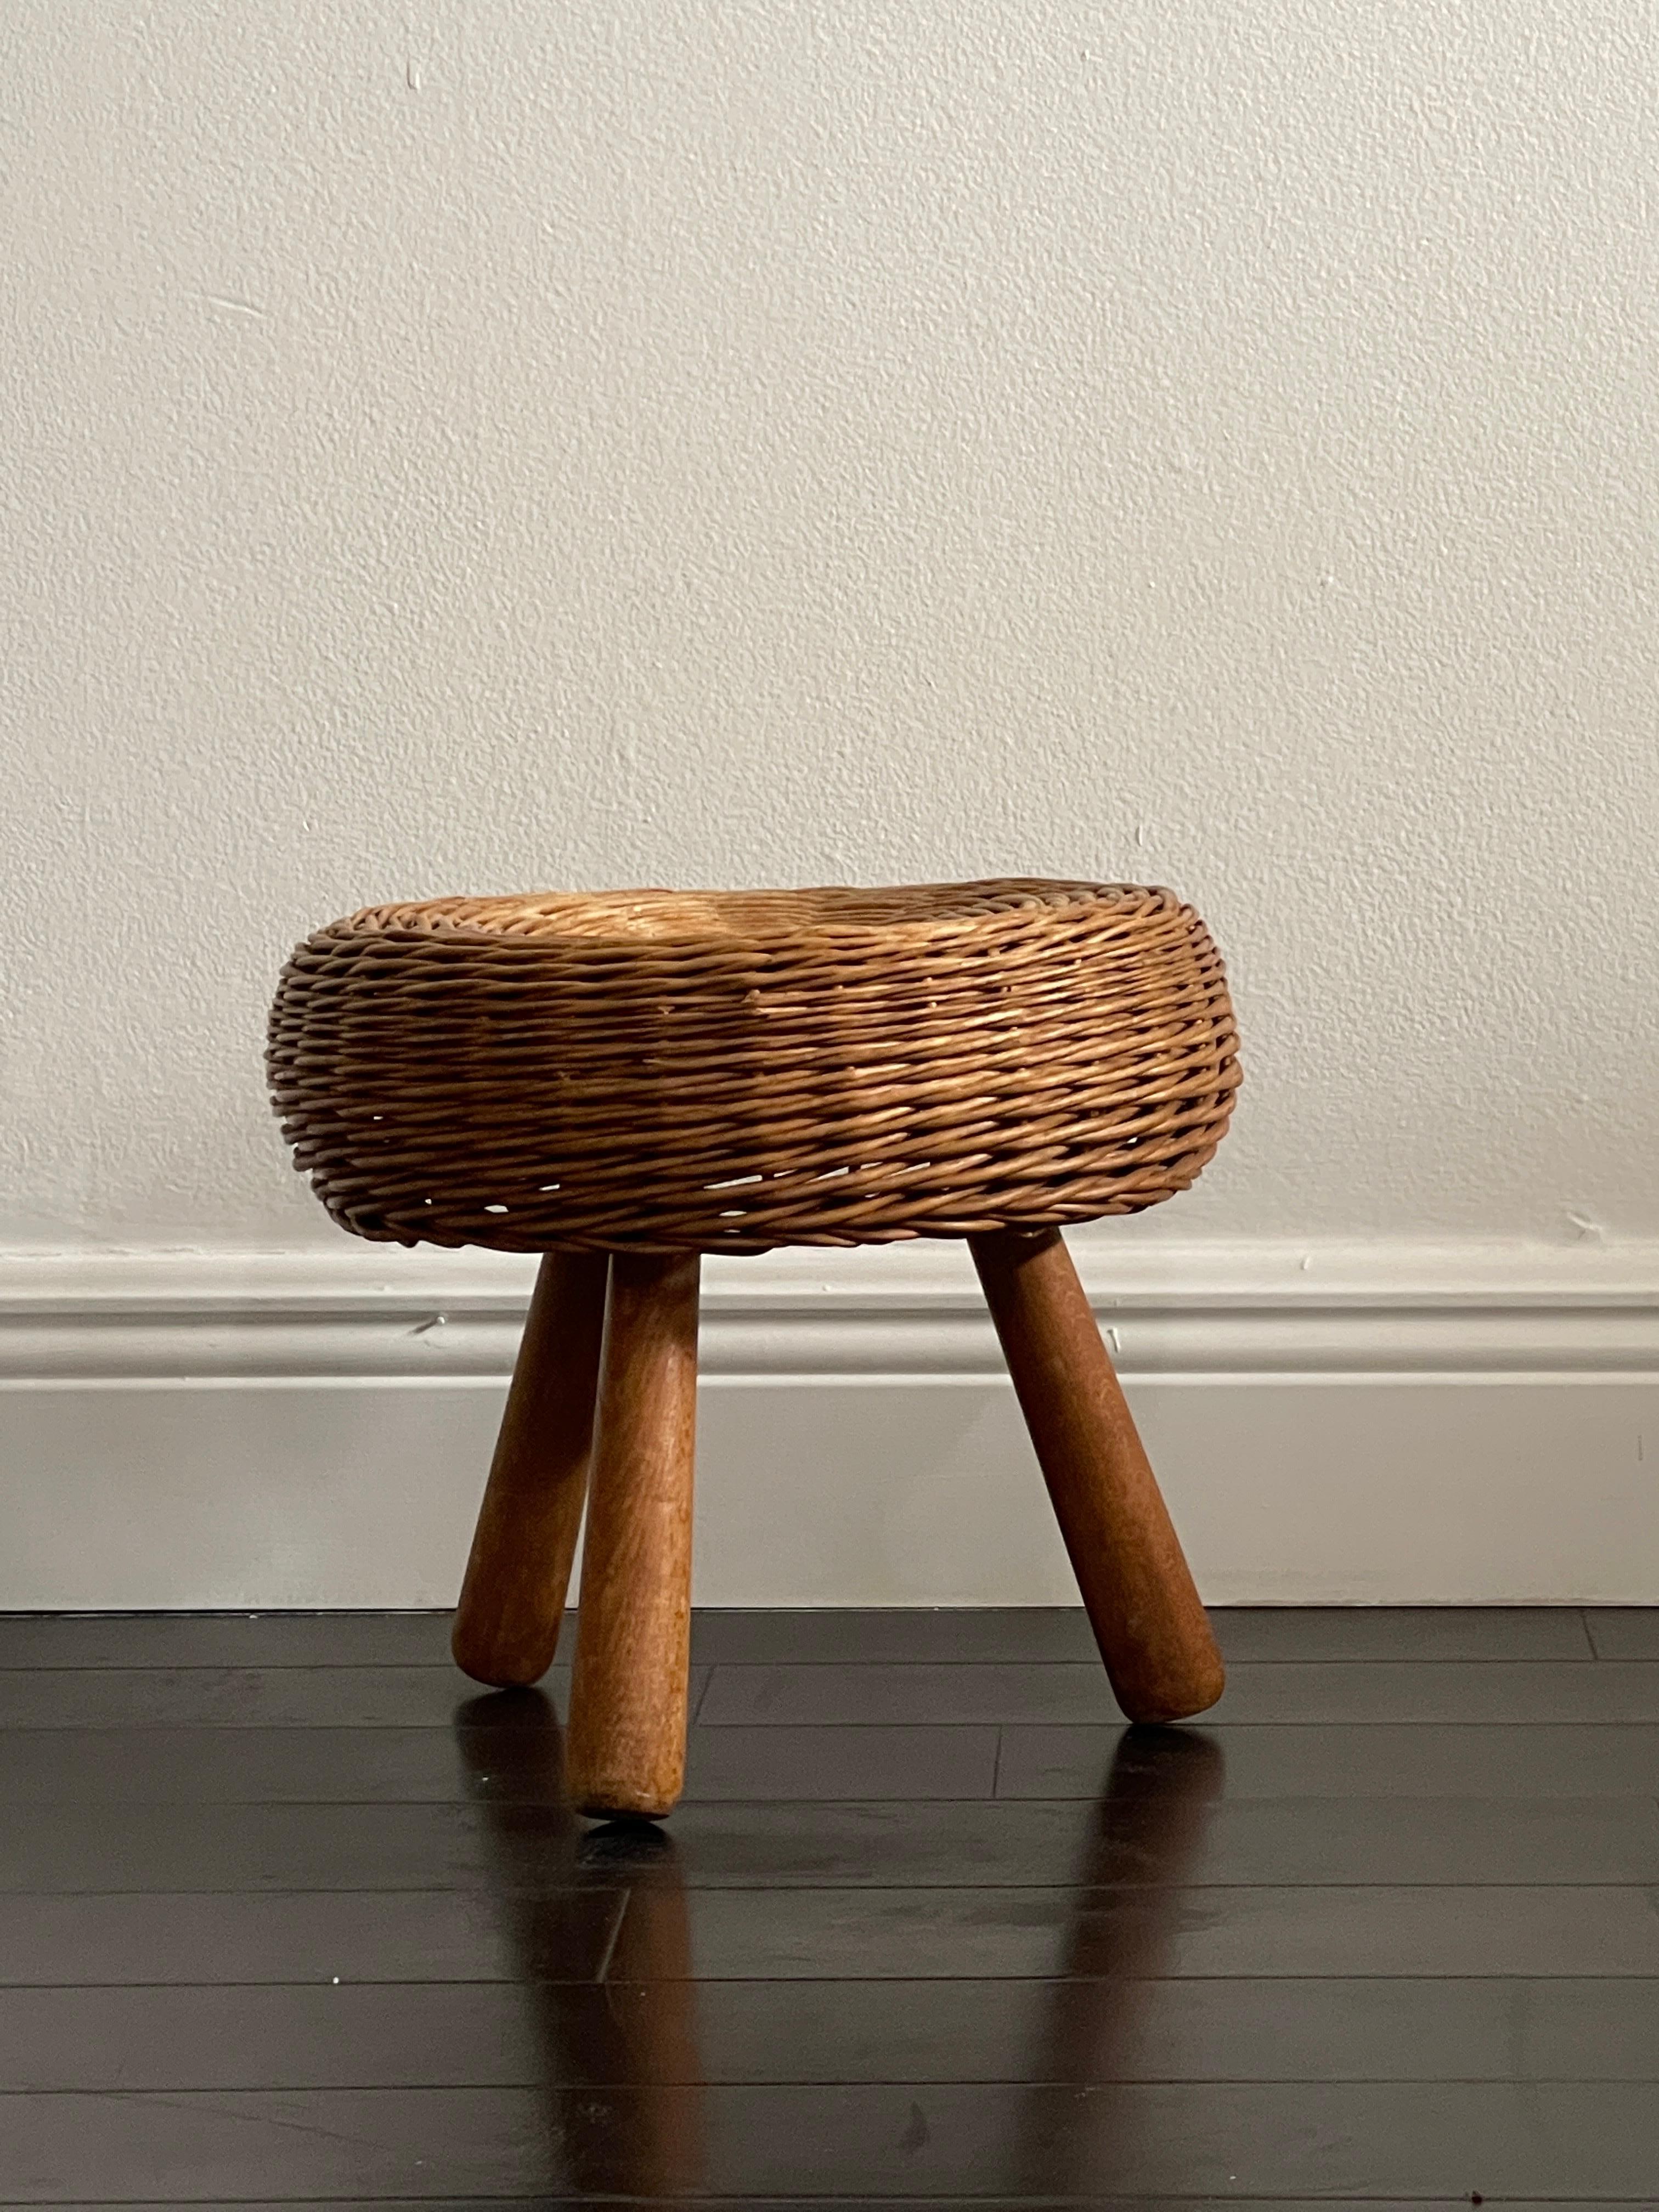 Mid 20th century Tony Paul Wicker stool with three legs and a beautiful handcrafted round top. This iconic stool is very popular and fits in almost any room or space. The stool is in great vintage condition and ready to make a statement in your